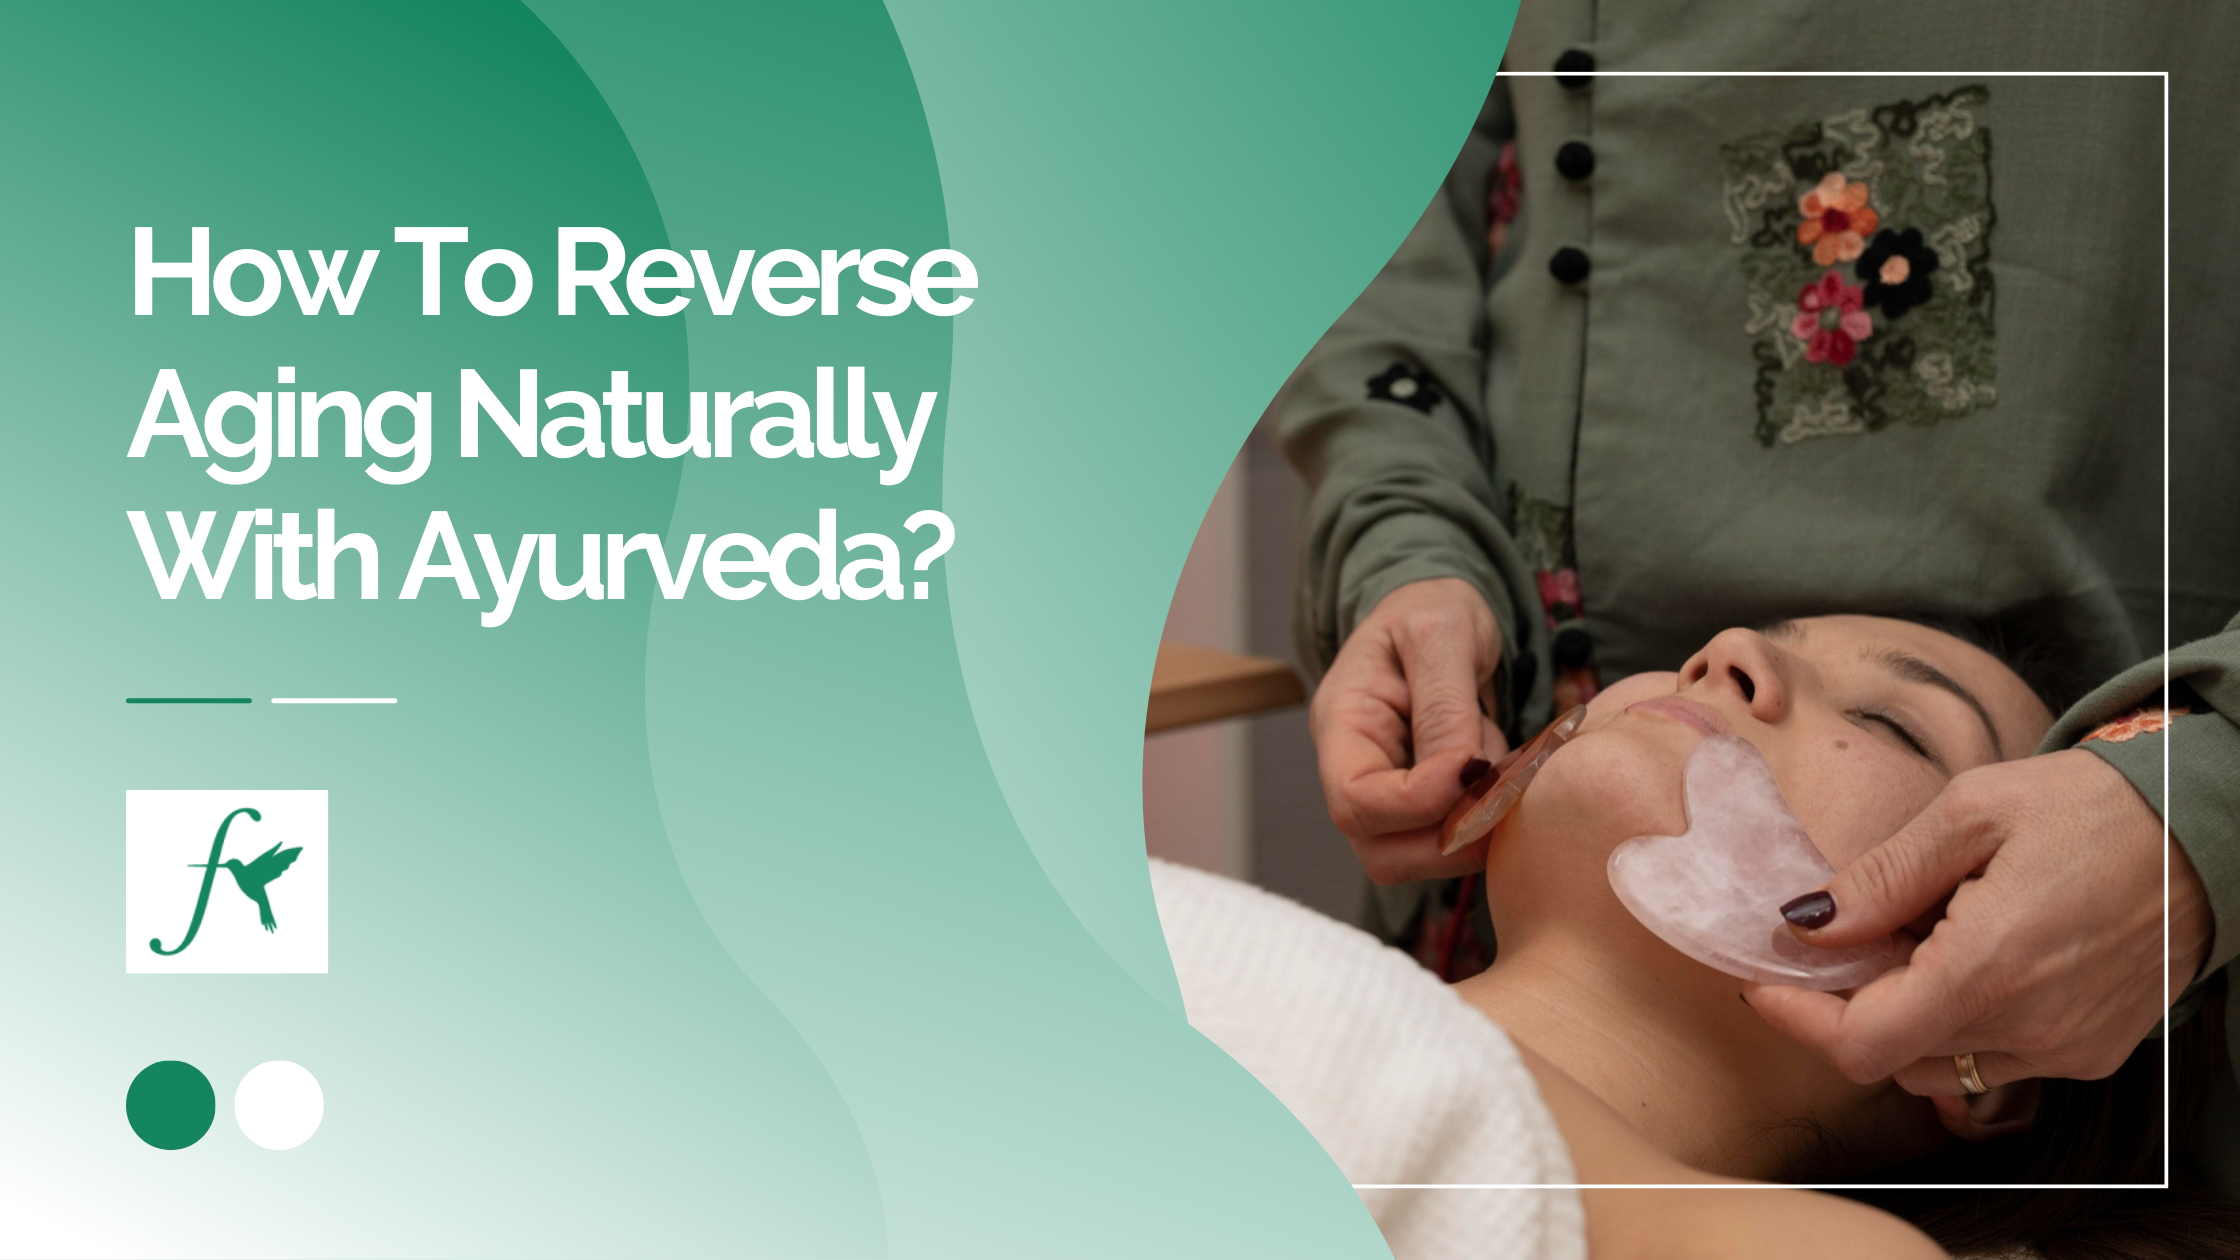 Reverse Aging Naturally With Ayurveda